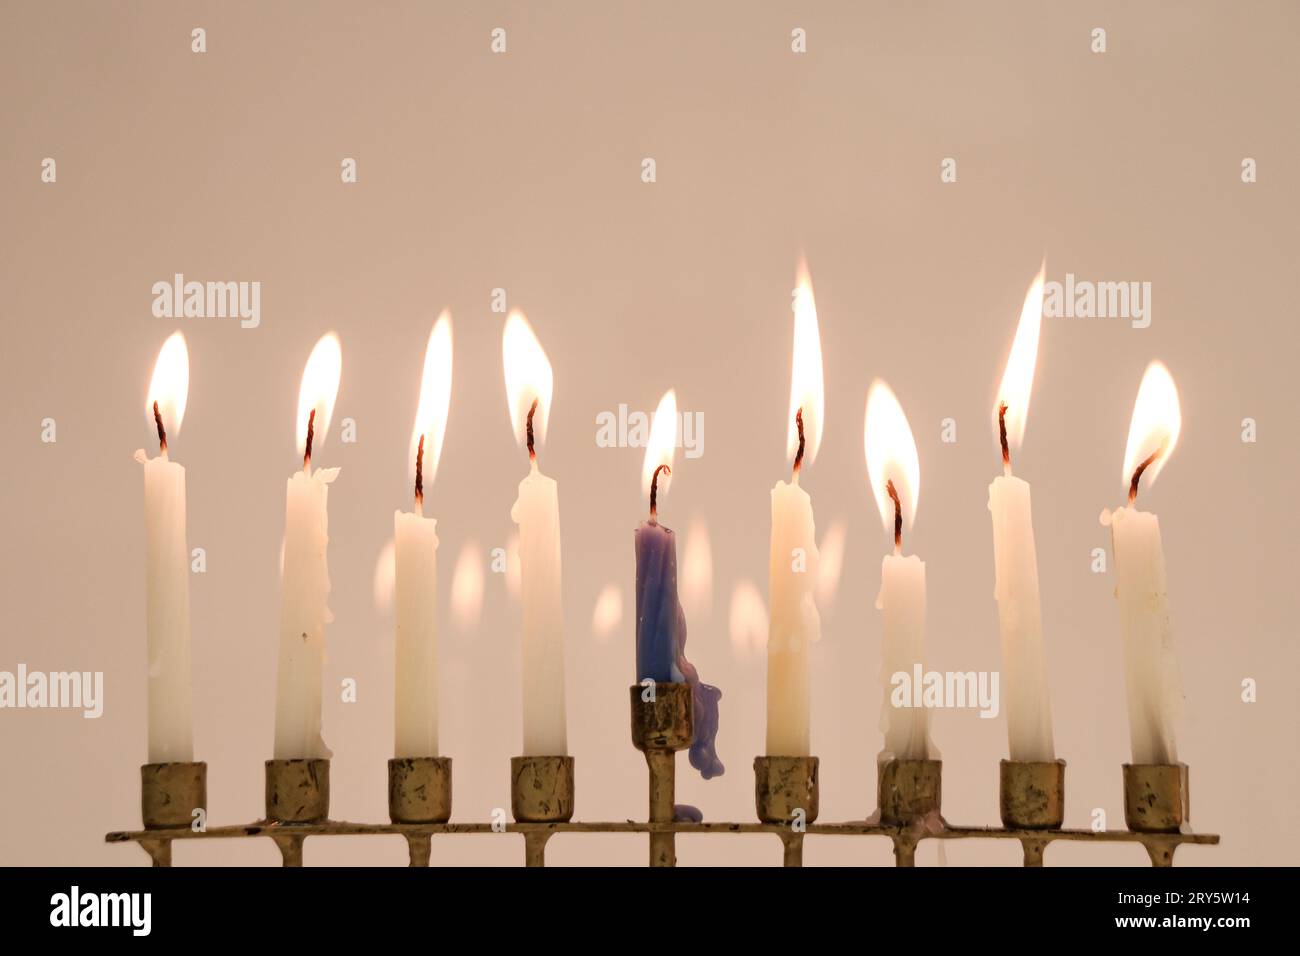 A full menorah on the last night of Hanukkah. Eight white candles and the center is blue. All candles are lit and reflecting in the back Stock Photo